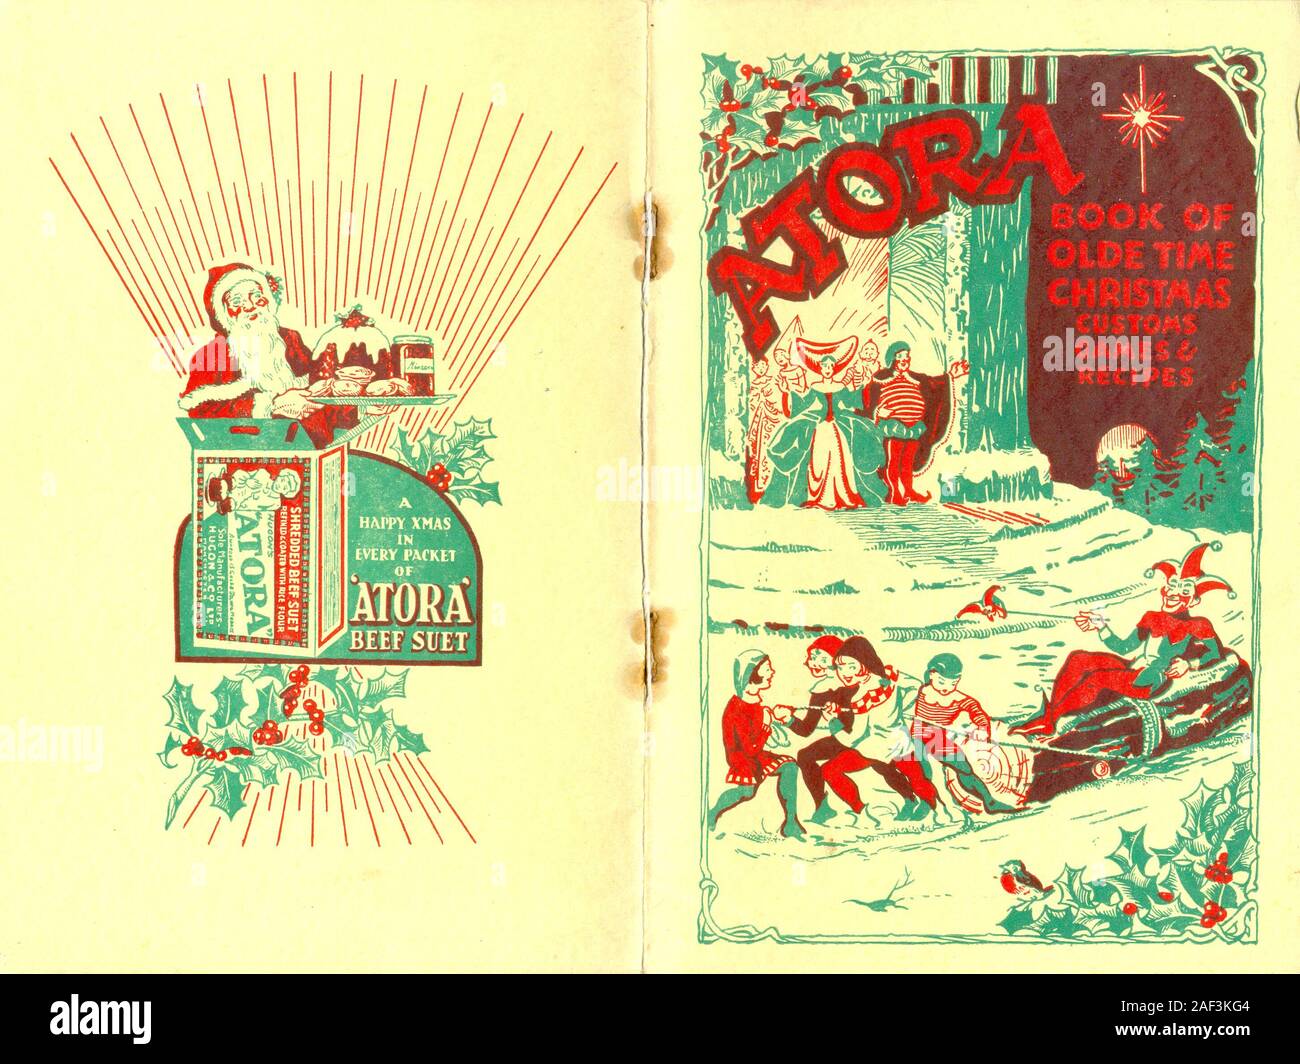 Atora Book of Old Time Christmas Customs Games & Recipes 1934 Stock Photo